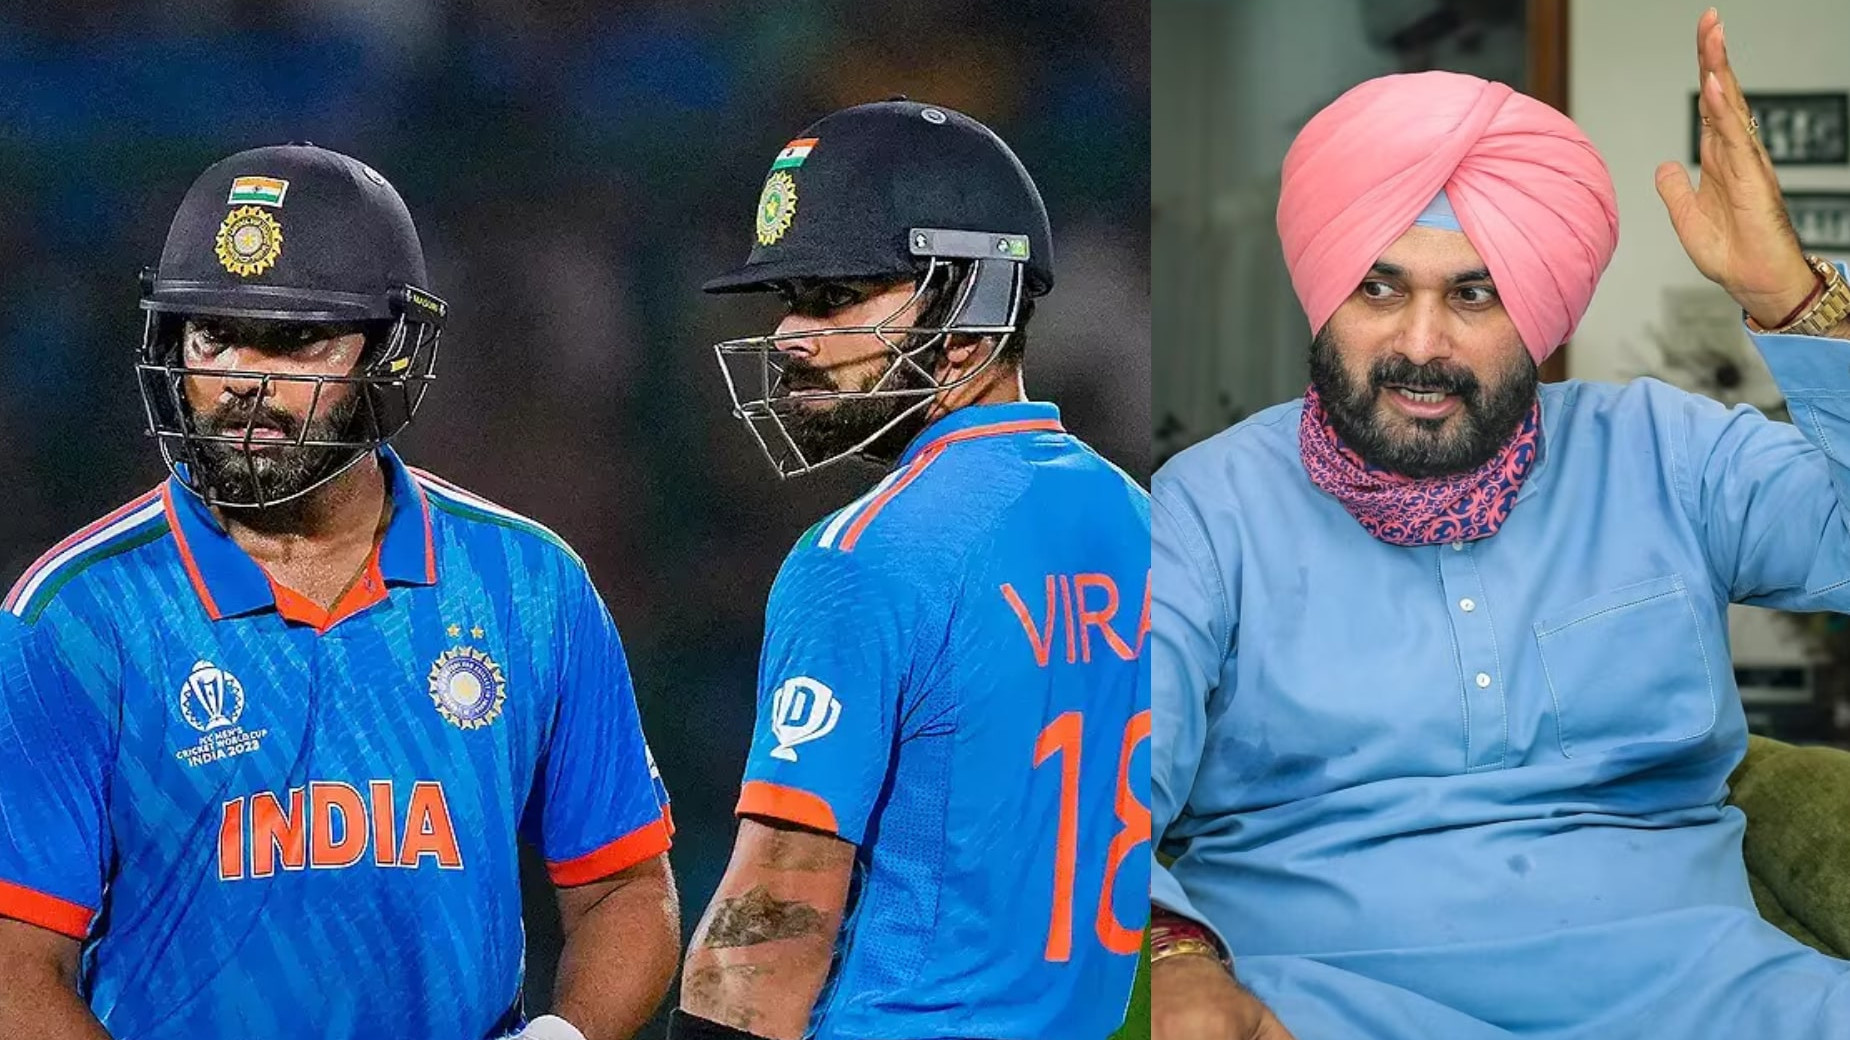 “They will be needed”- Navjot Singh Sidhu on Virat Kohli and Rohit Sharma playing T20 World Cup 2024